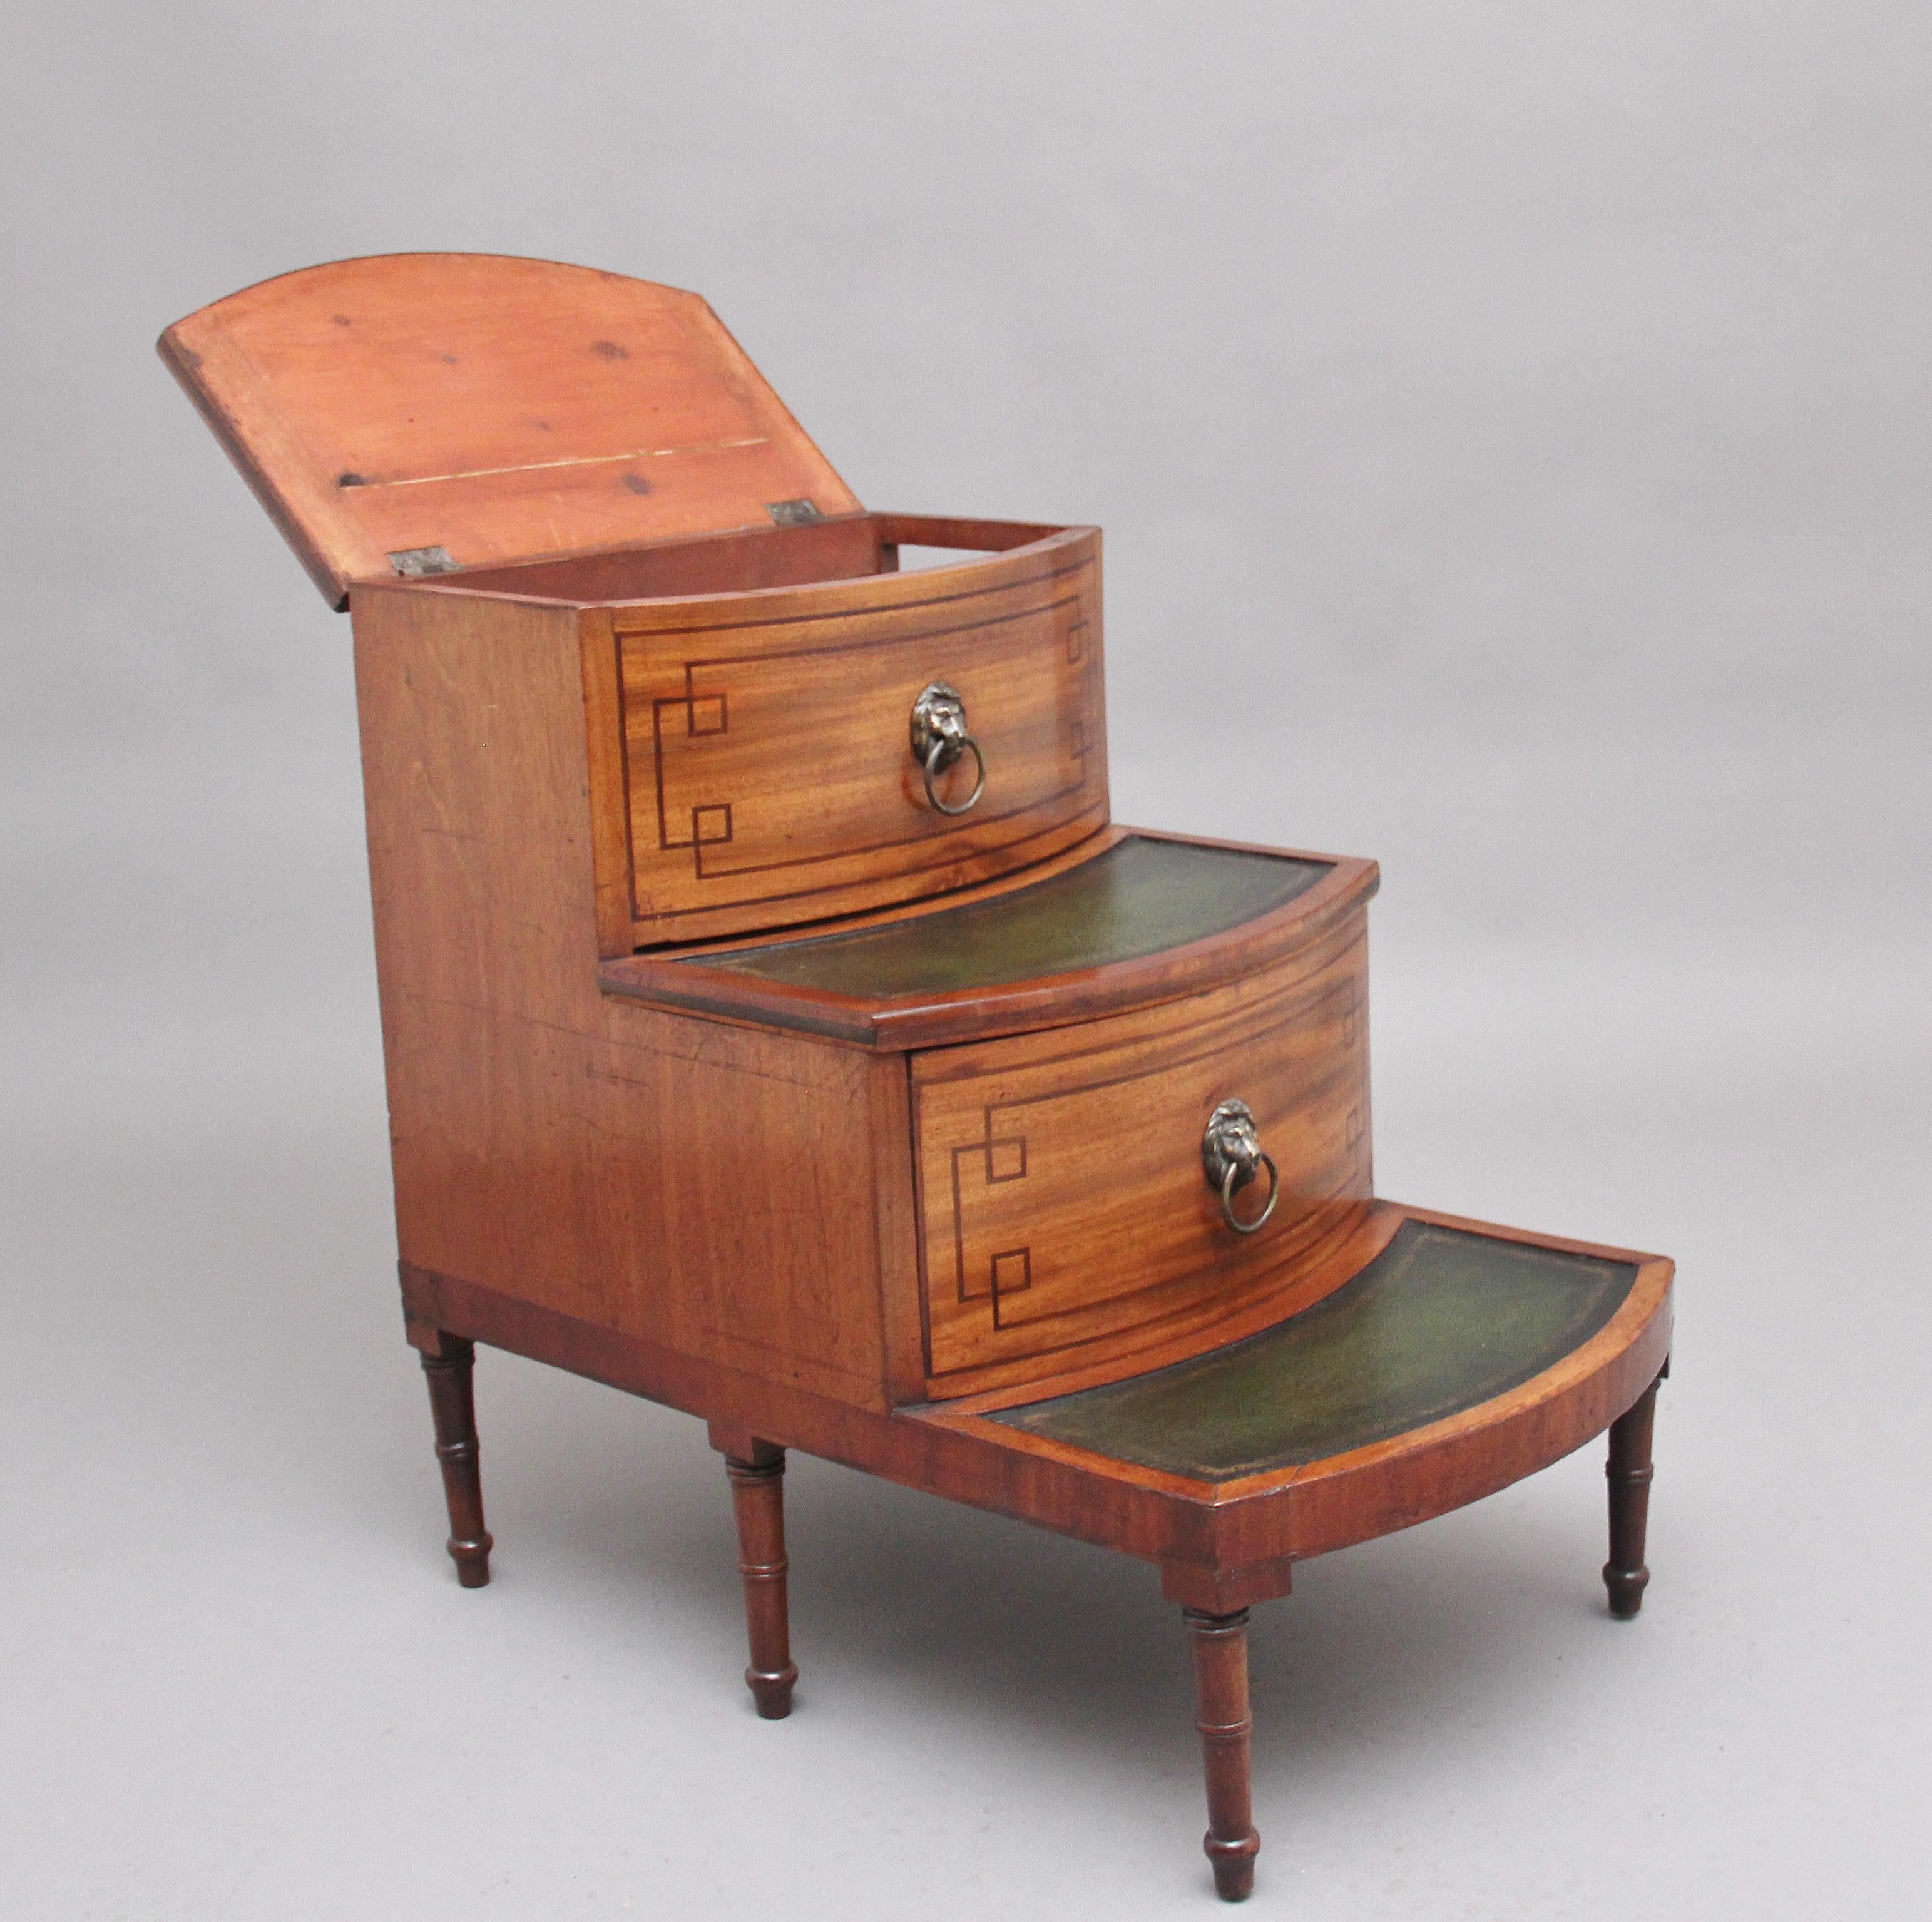 19th century mahogany library steps with three green leather lined steps decorated with blind and gold tooling, the top step having a hinged lift up lid to reveal a spacious compartment space, the front of each step having inlay decoration and